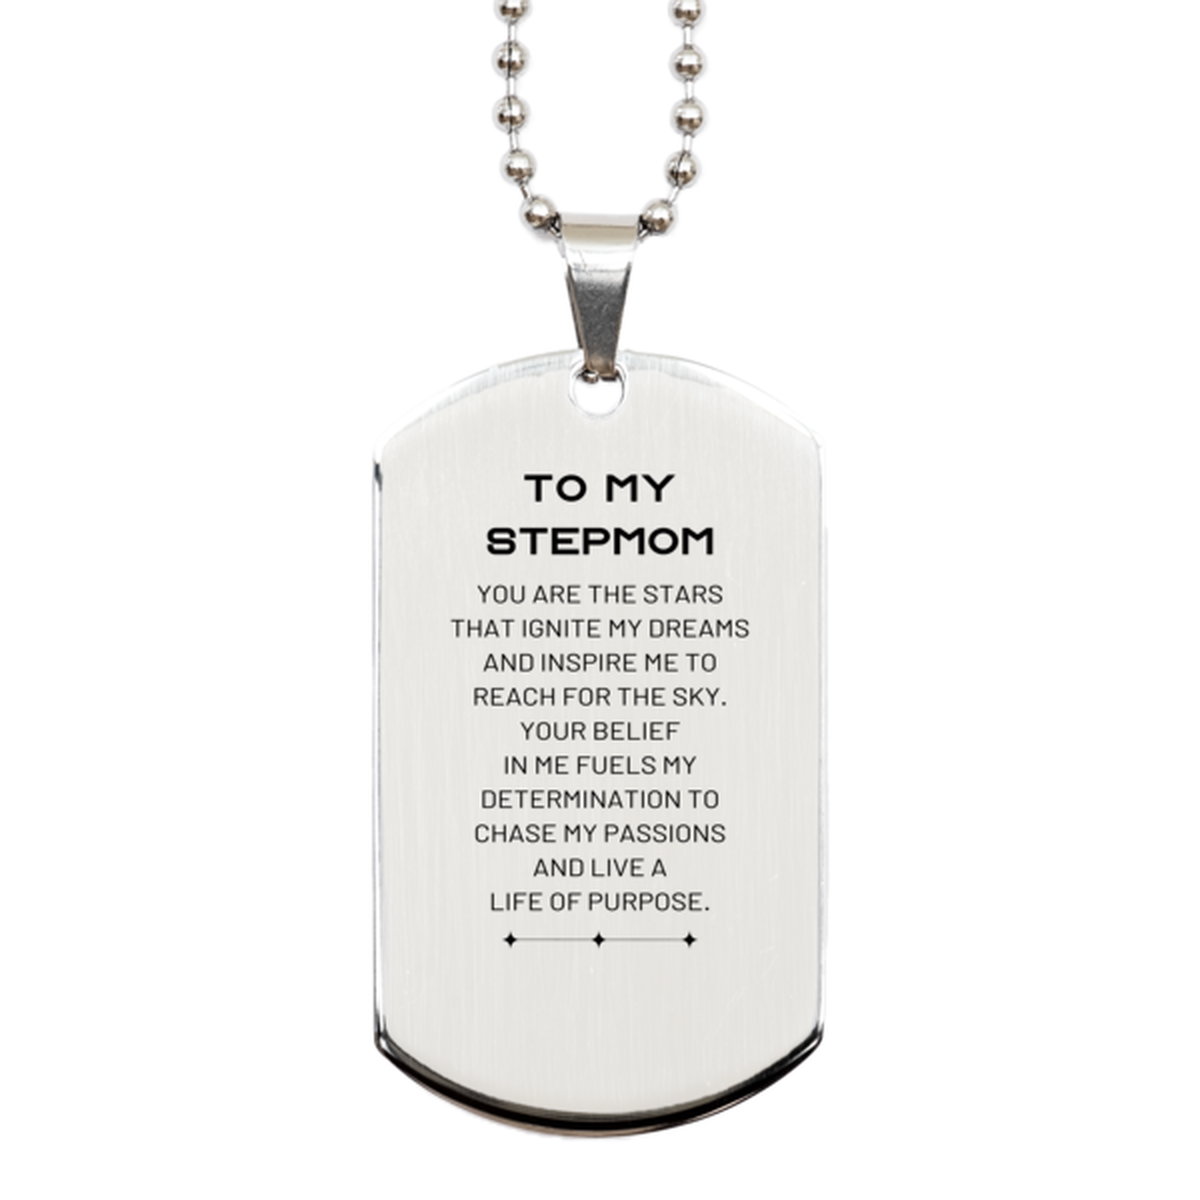 To My Stepmom Silver Dog Tag, You are the stars that ignite my dreams and inspire me to reach for the sky, Birthday Unique Gifts For Stepmom, Thank You Gifts For Stepmom